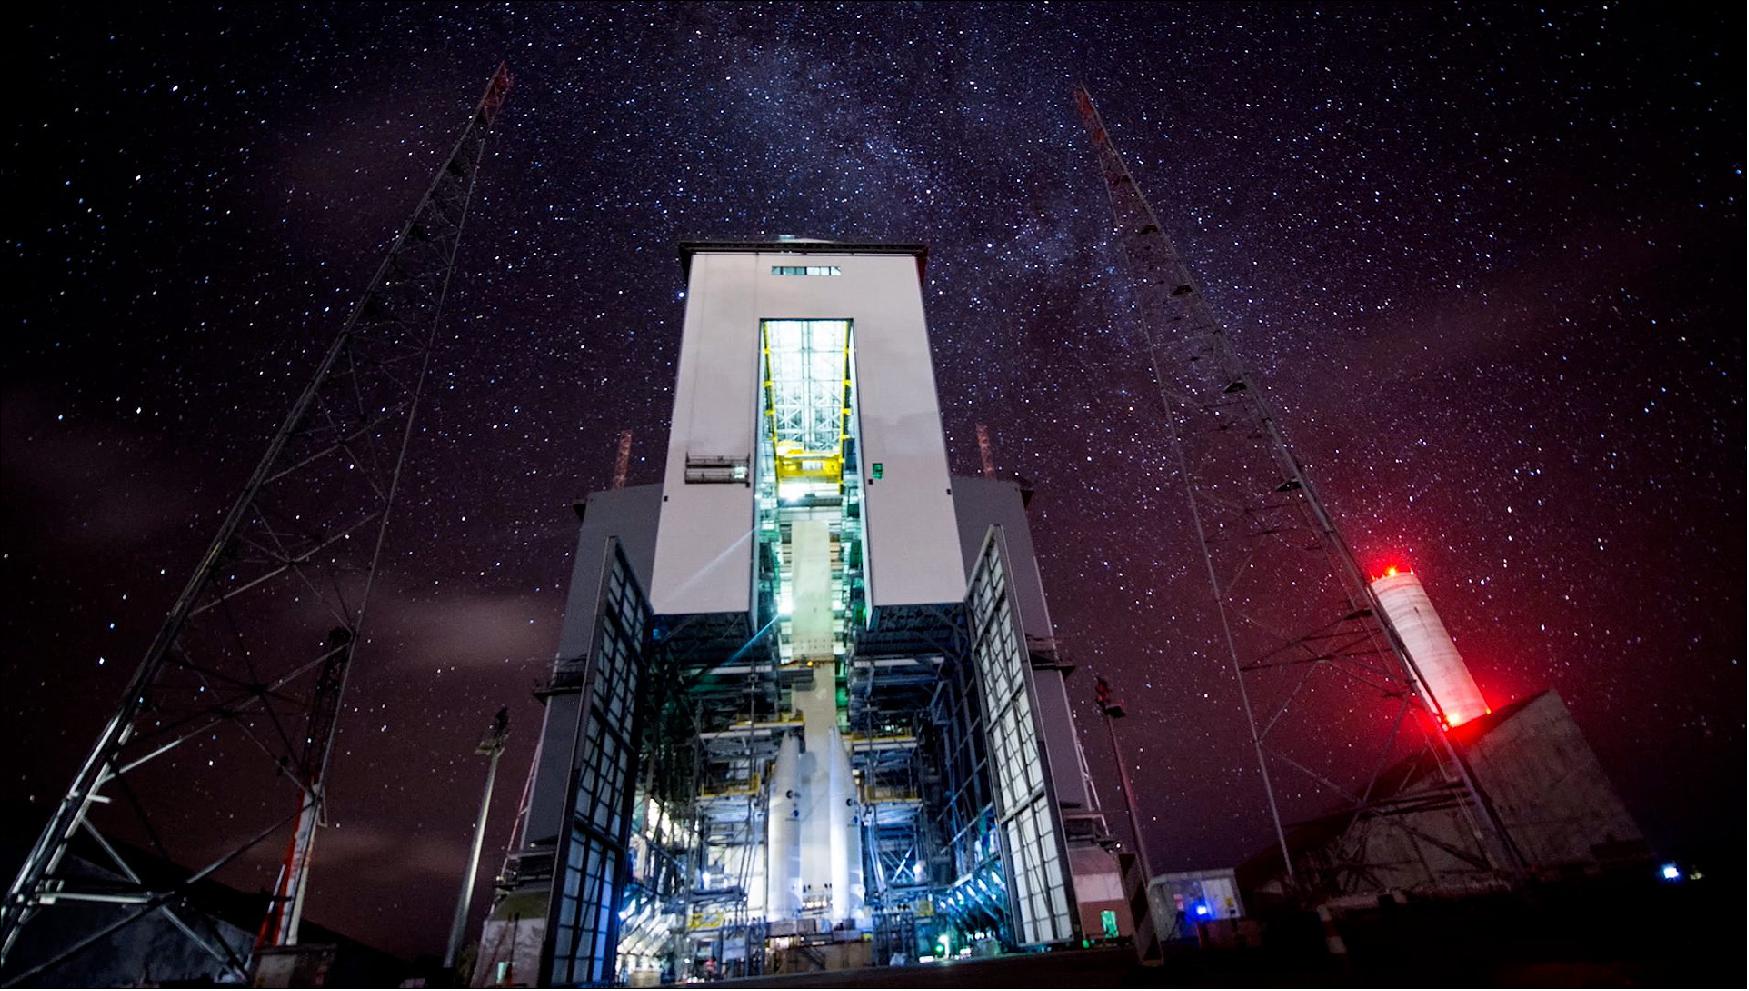 Figure 27: A timelapse was filmed under the stars on the Ariane 6 launch base at Europe’s Spaceport in French Guiana. Preparations are under way for the arrival of Ariane 6, Europe’s next-generation launch vehicle. Imagine yourself standing on the launch pad in front of the 90-meter high mobile gantry looking at the stars. Ariane 6, developed by ESA, has two versions depending on the required performance. This rocket will be capable of a wide range of missions to guarantee independent access to space for Europe (image credit: ESA/CNES/Arianespace)